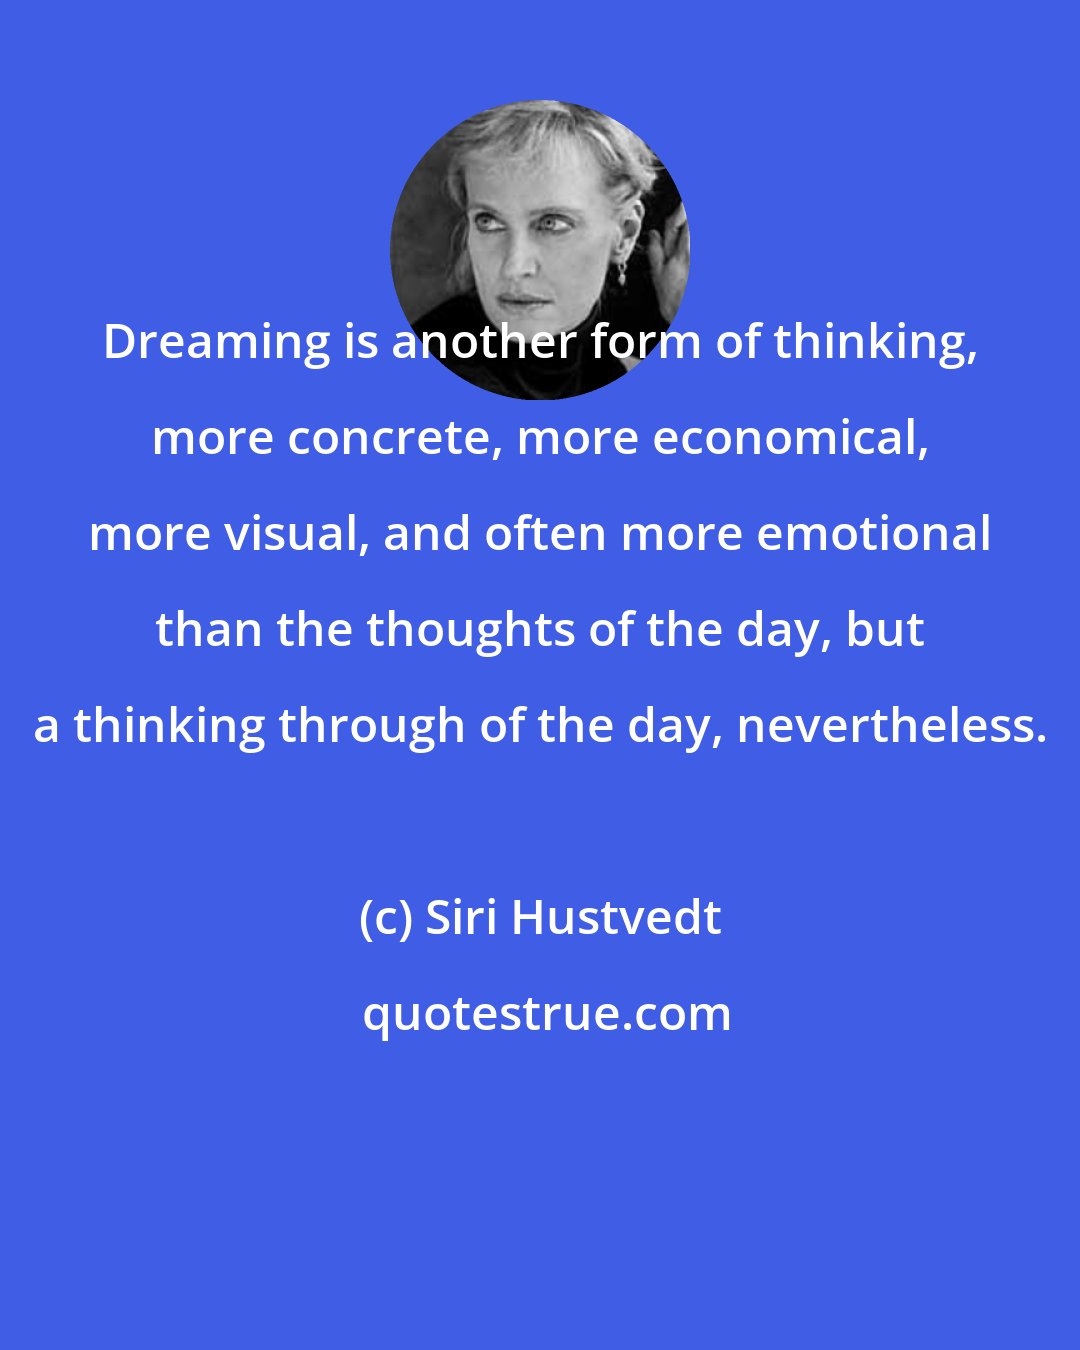 Siri Hustvedt: Dreaming is another form of thinking, more concrete, more economical, more visual, and often more emotional than the thoughts of the day, but a thinking through of the day, nevertheless.